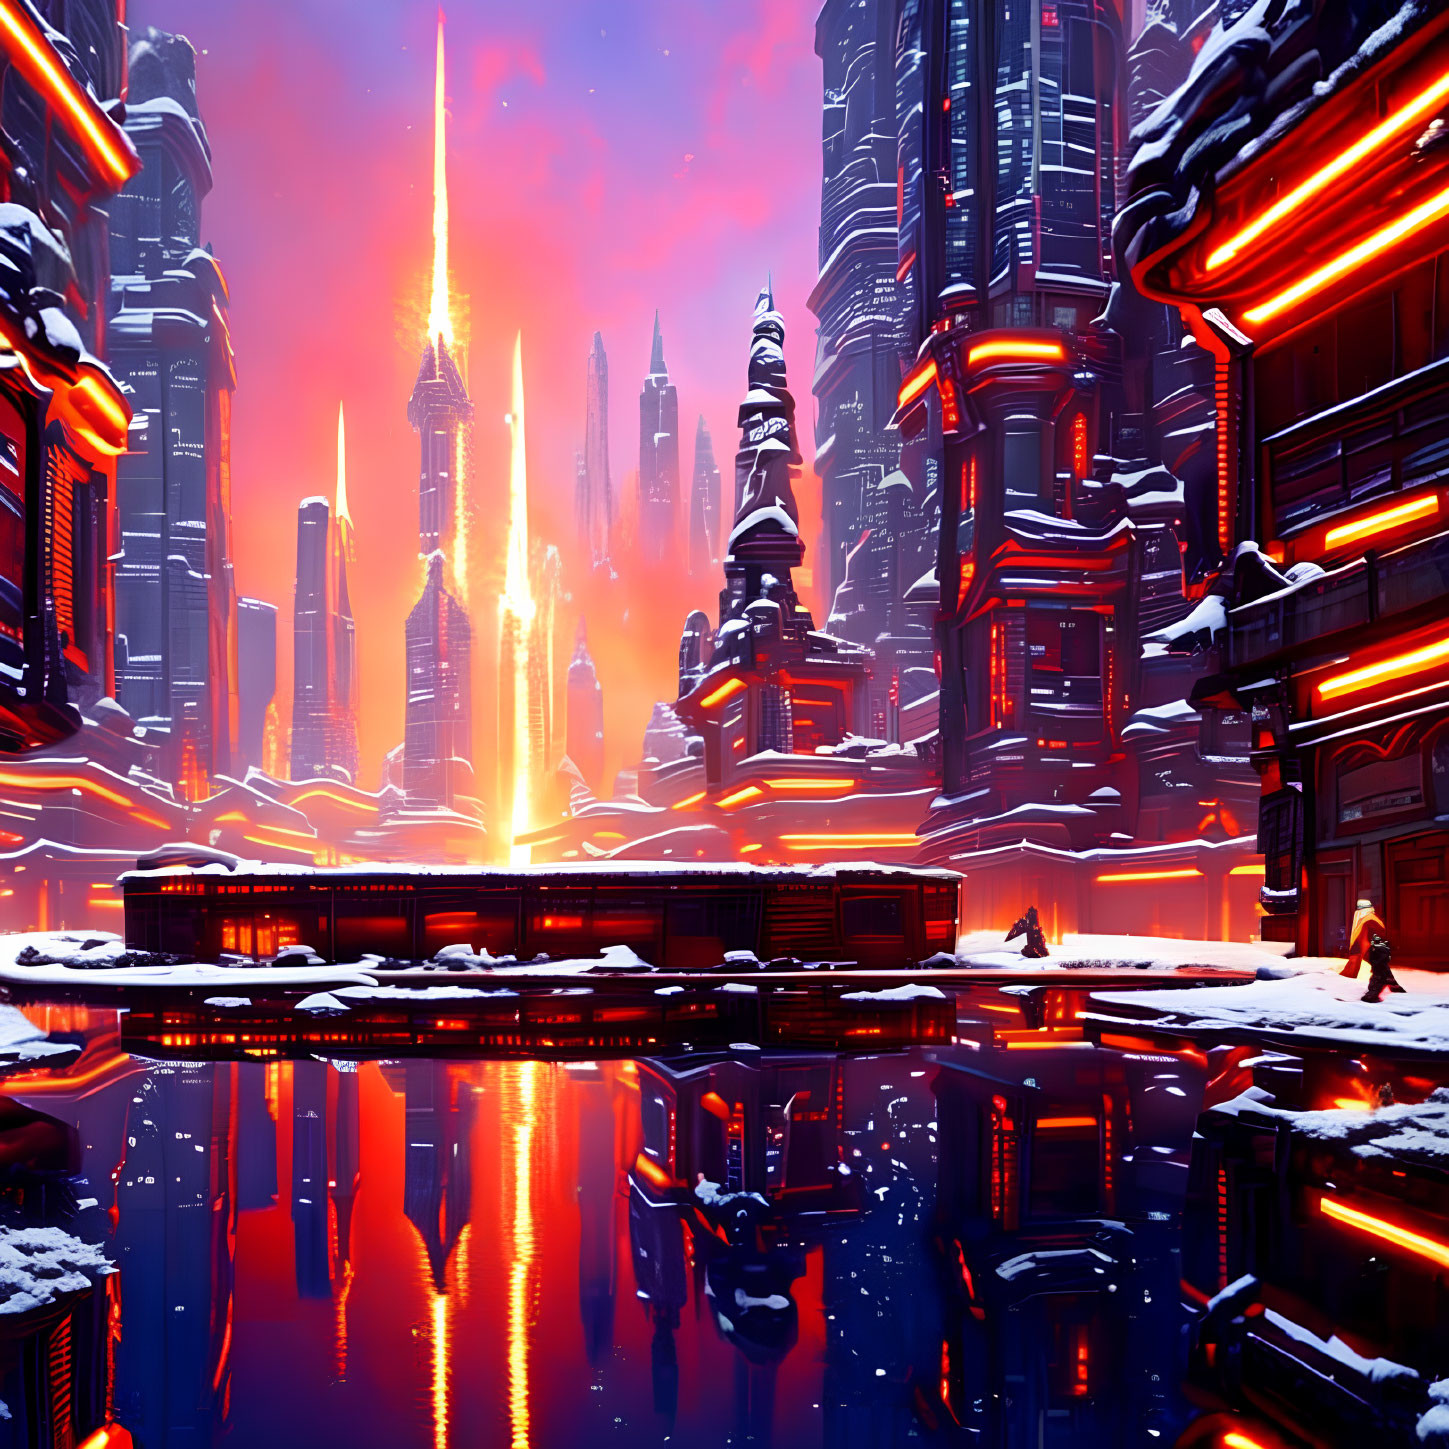 Snow-covered futuristic cityscape with neon-lit skyscrapers reflected in calm water at dusk